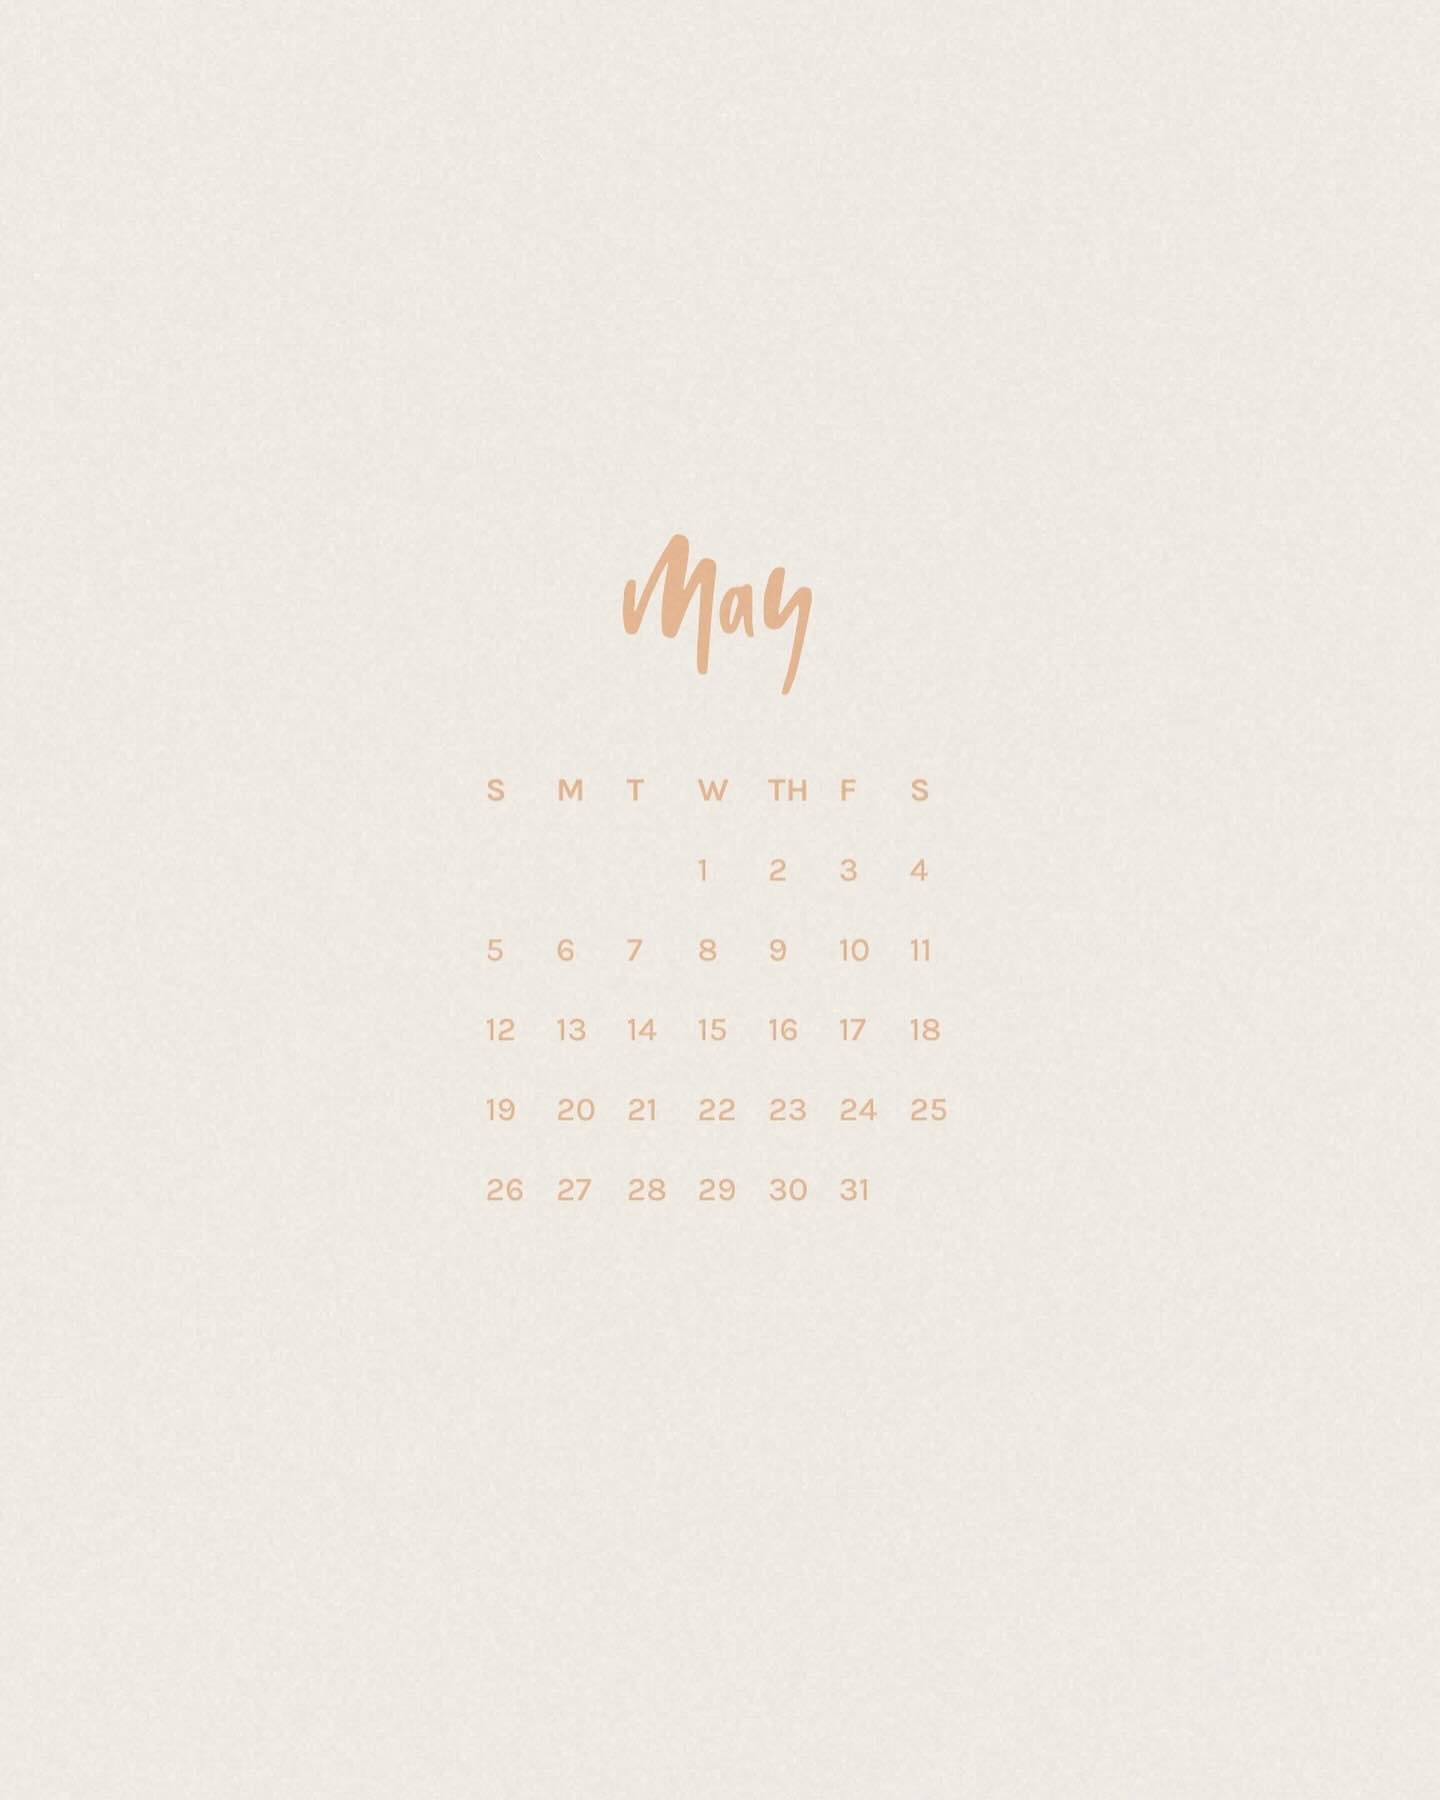 may is here! 💐 I&rsquo;m excited to start this month for so many reasons &mdash; both of my boys graduate [one from grad school and one from VPK lol], I get to celebrate another mother&rsquo;s day loving on my babies and I don&rsquo;t take the privi